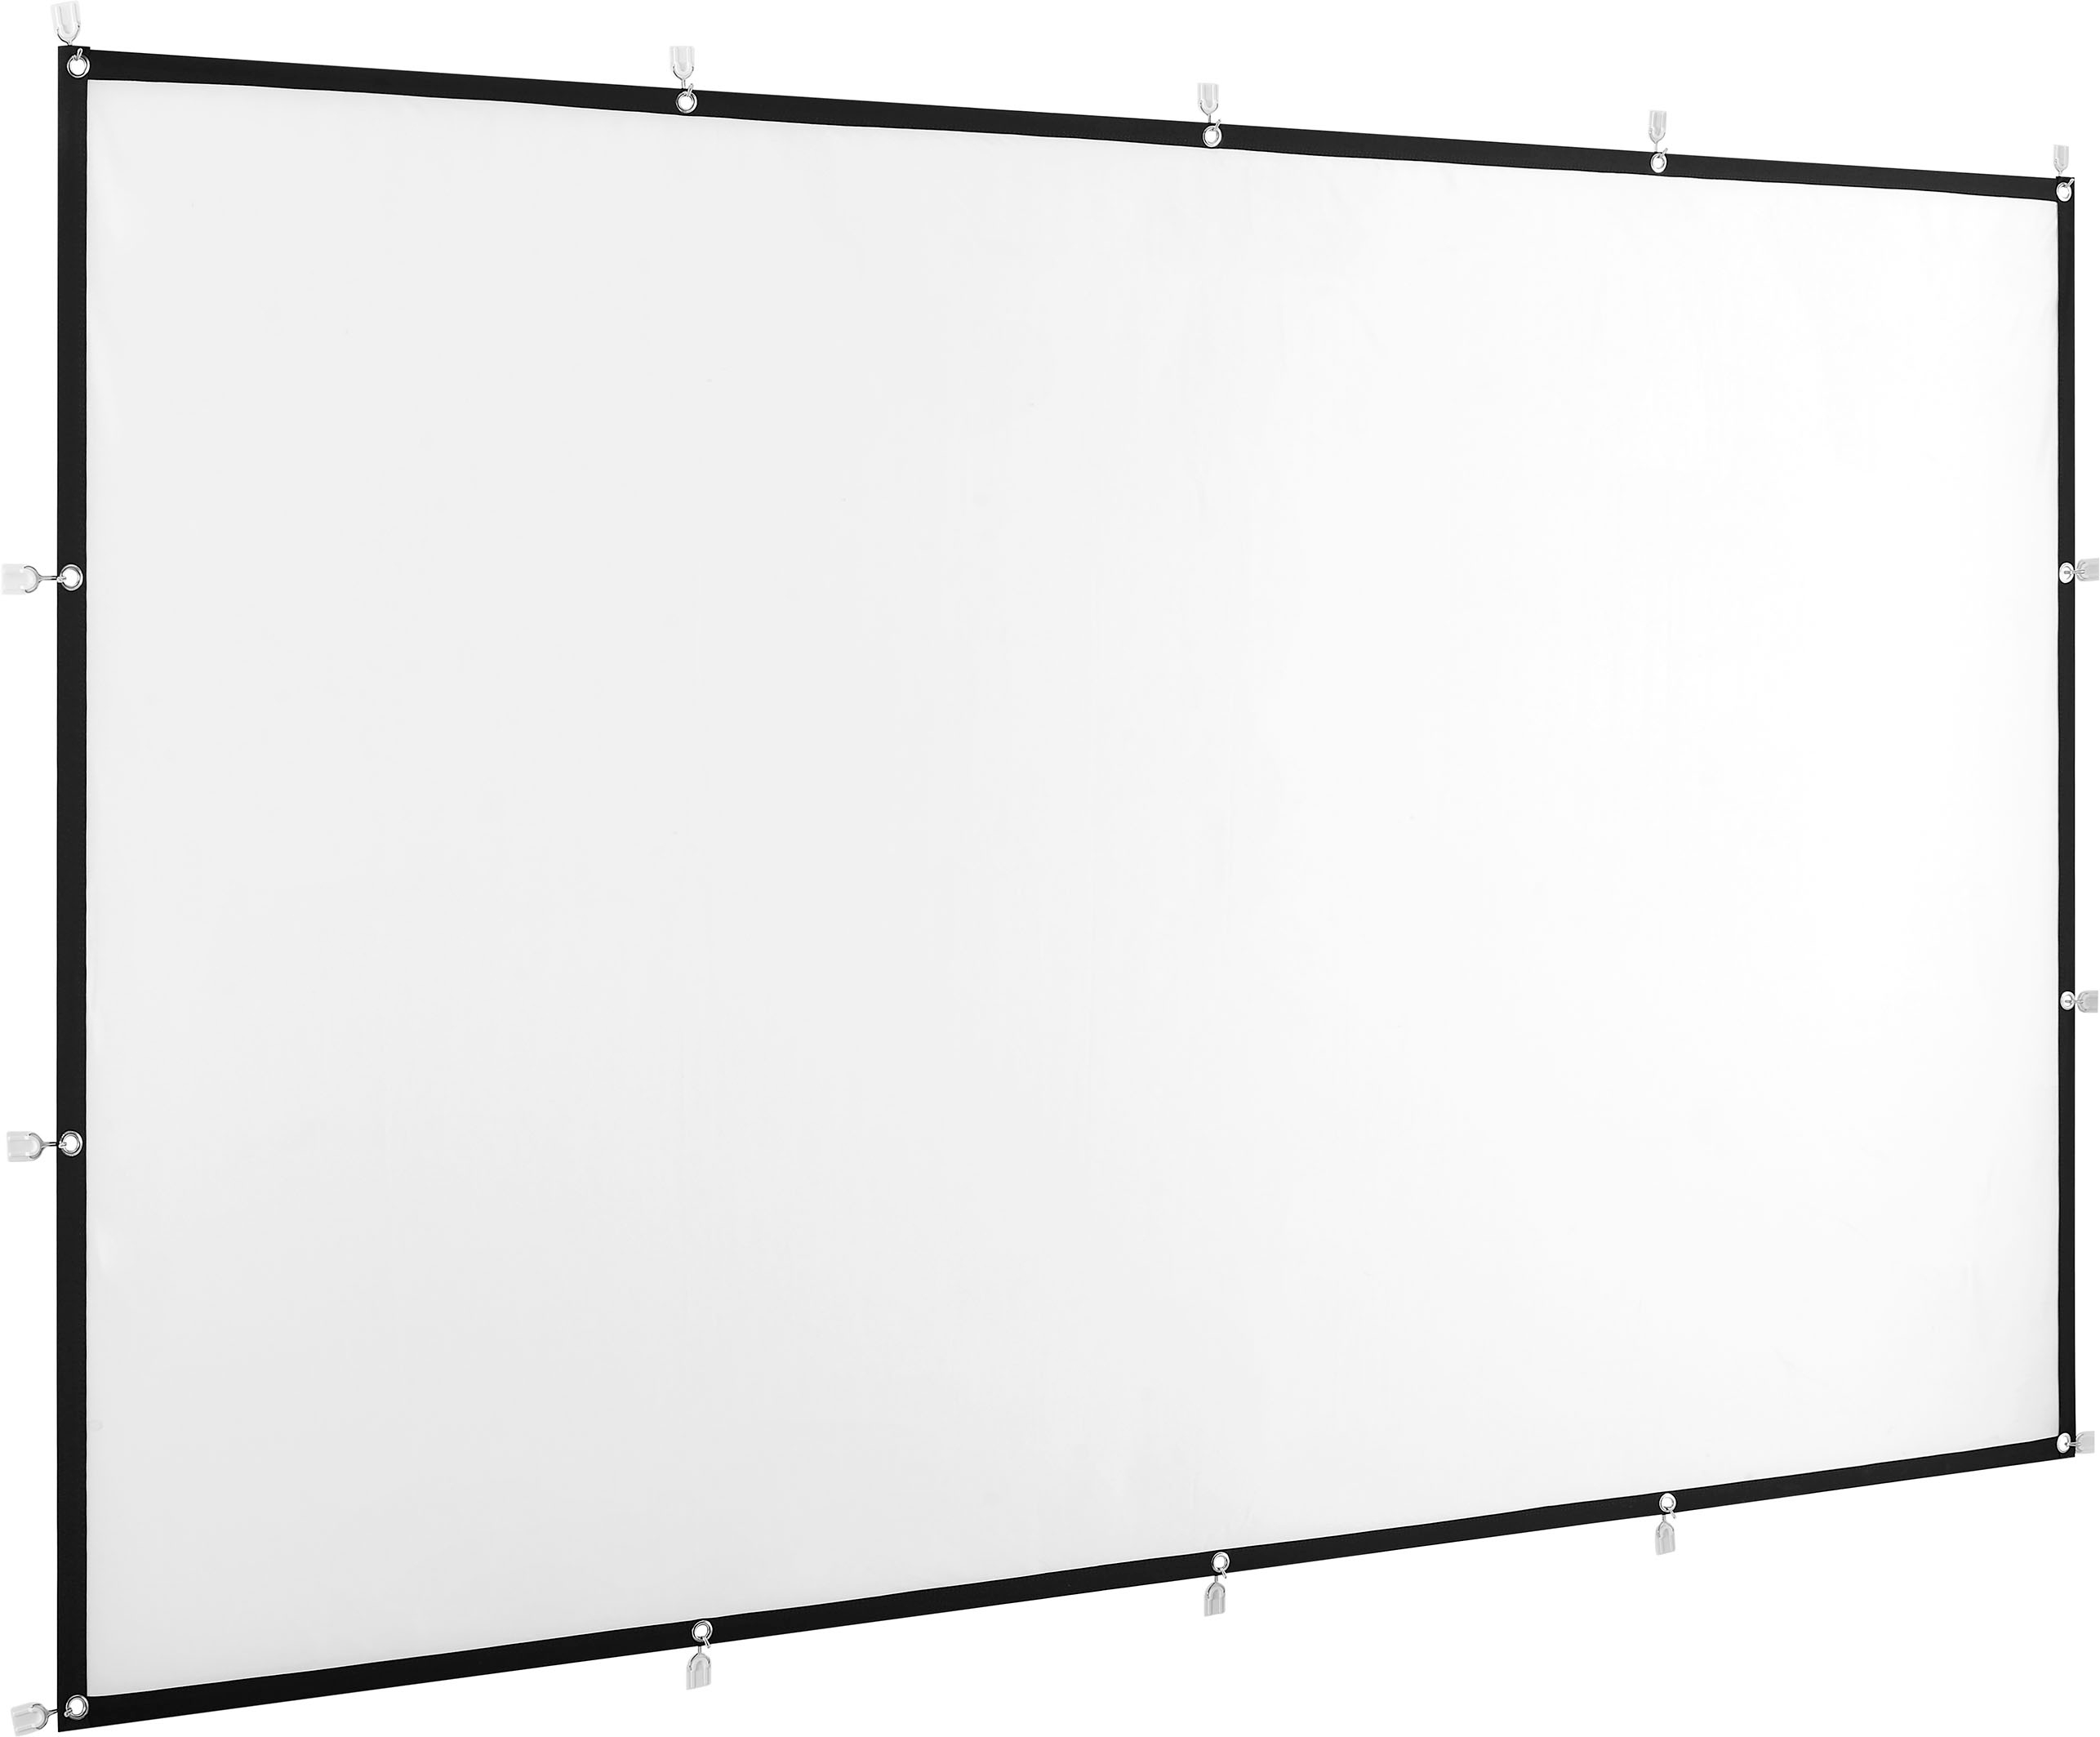 Angle View: VAVA - Ambient Light Rejecting (ALR) Projector Screen Pro - Gray